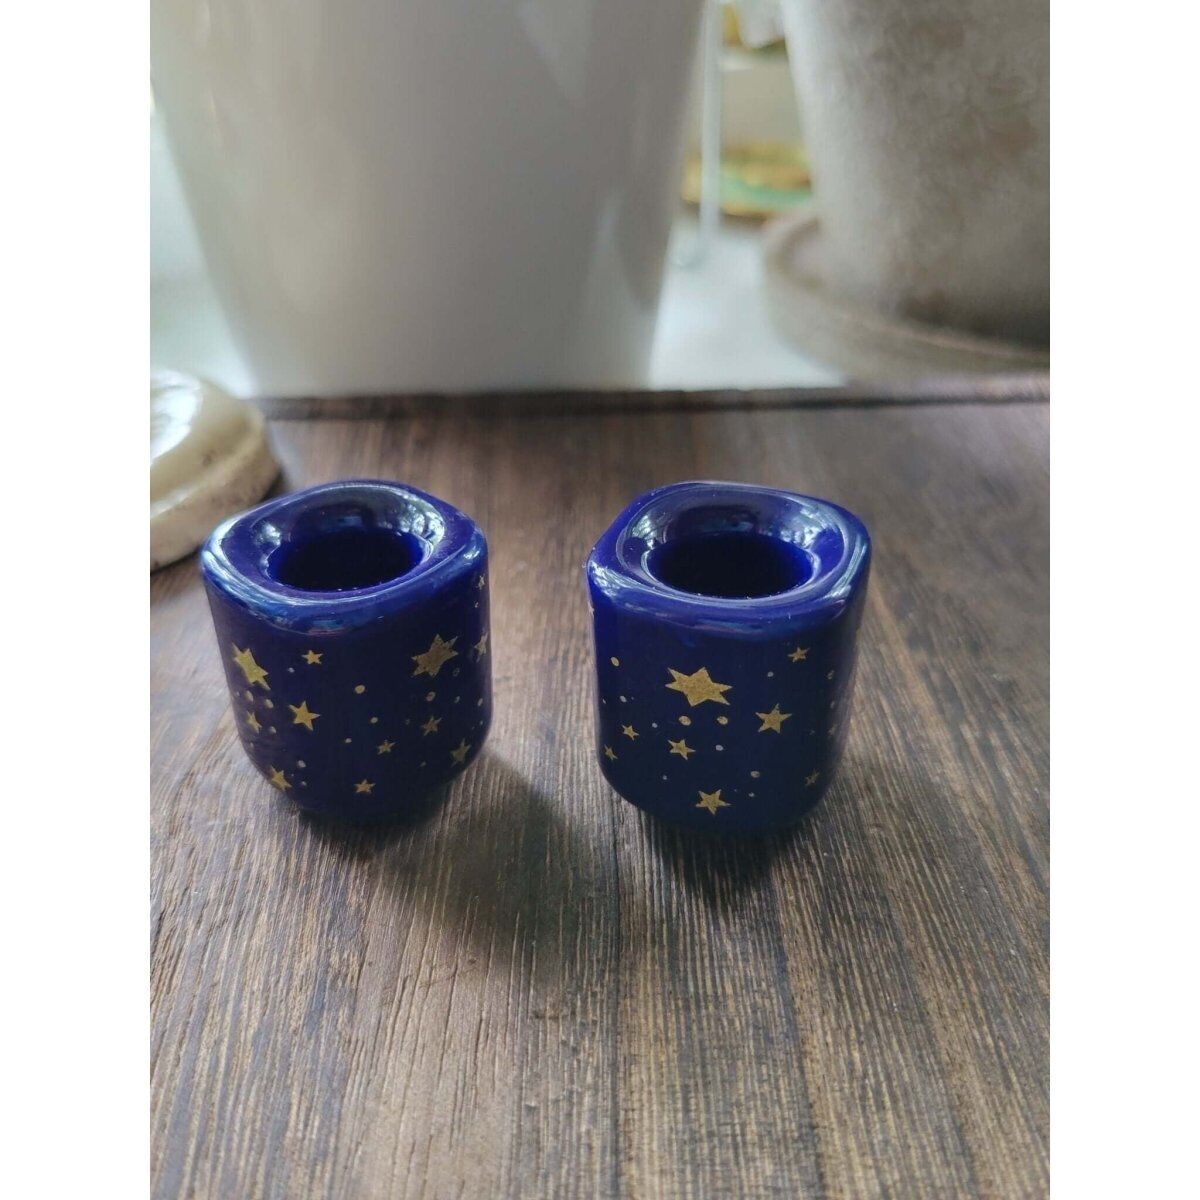 Handmade ceramic blue gold star chime holders, galaxy candle holders